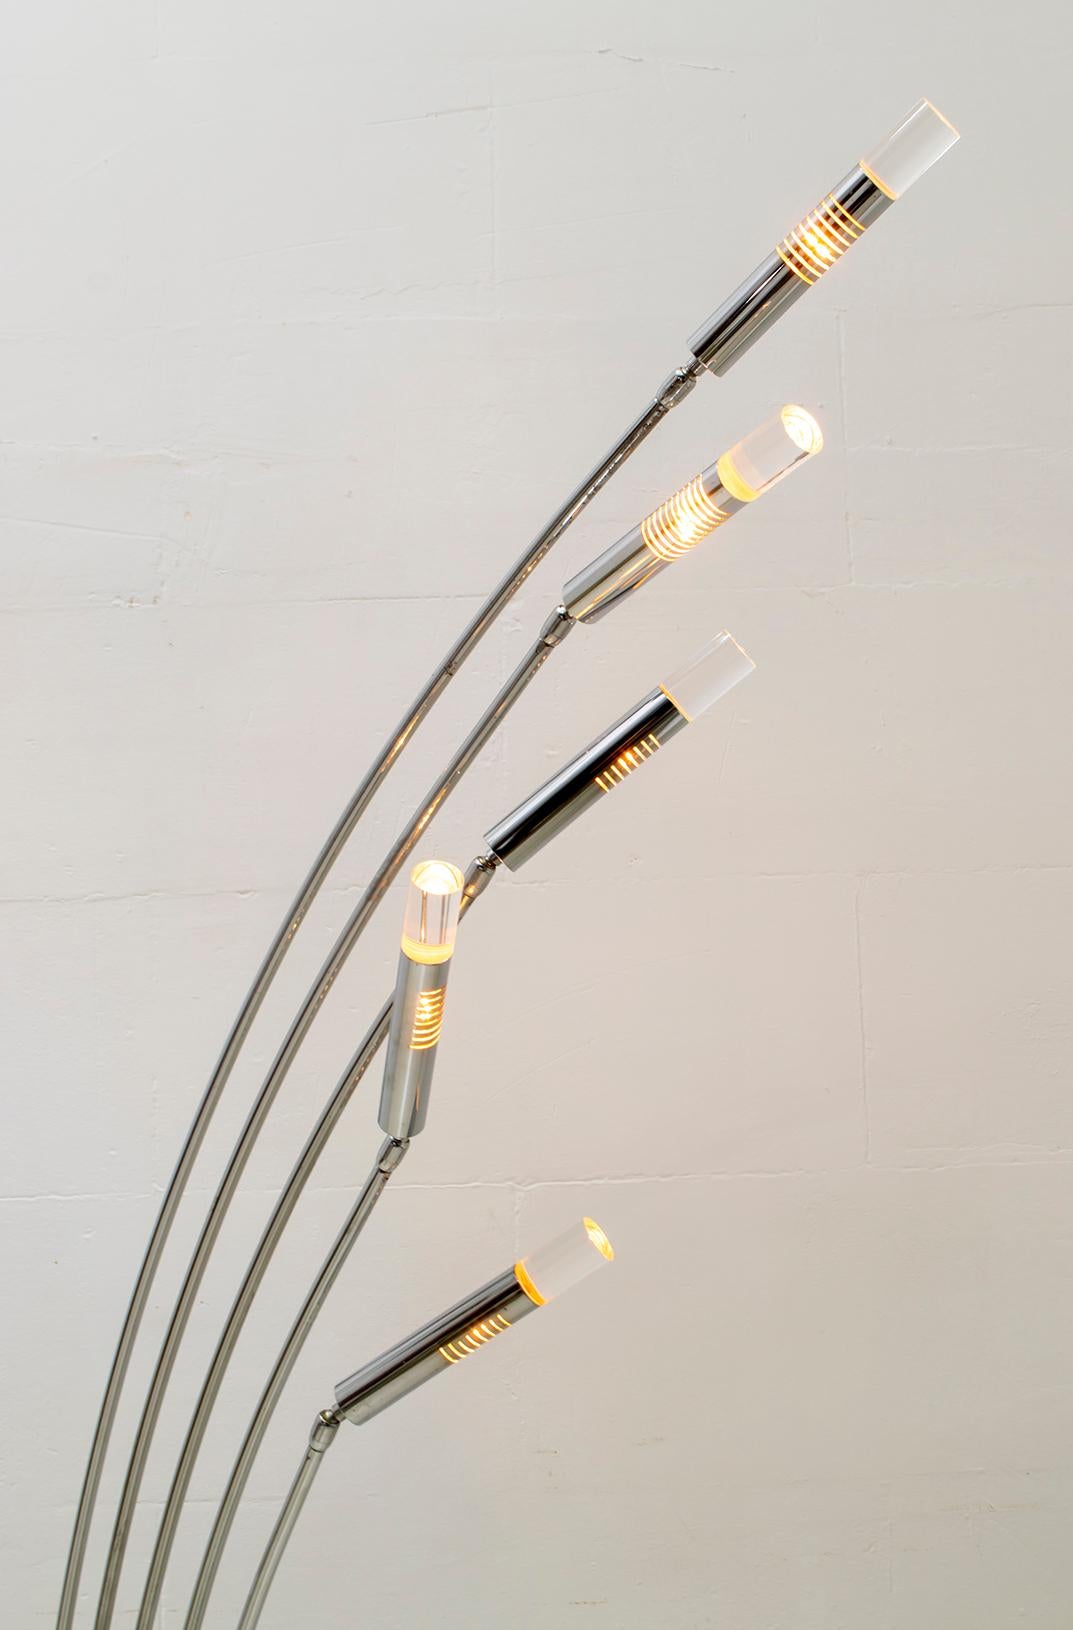 Midcentury Italian Arched Floor Lamp 5 Lights Chrome Metal and Lucite, 1960s For Sale 6